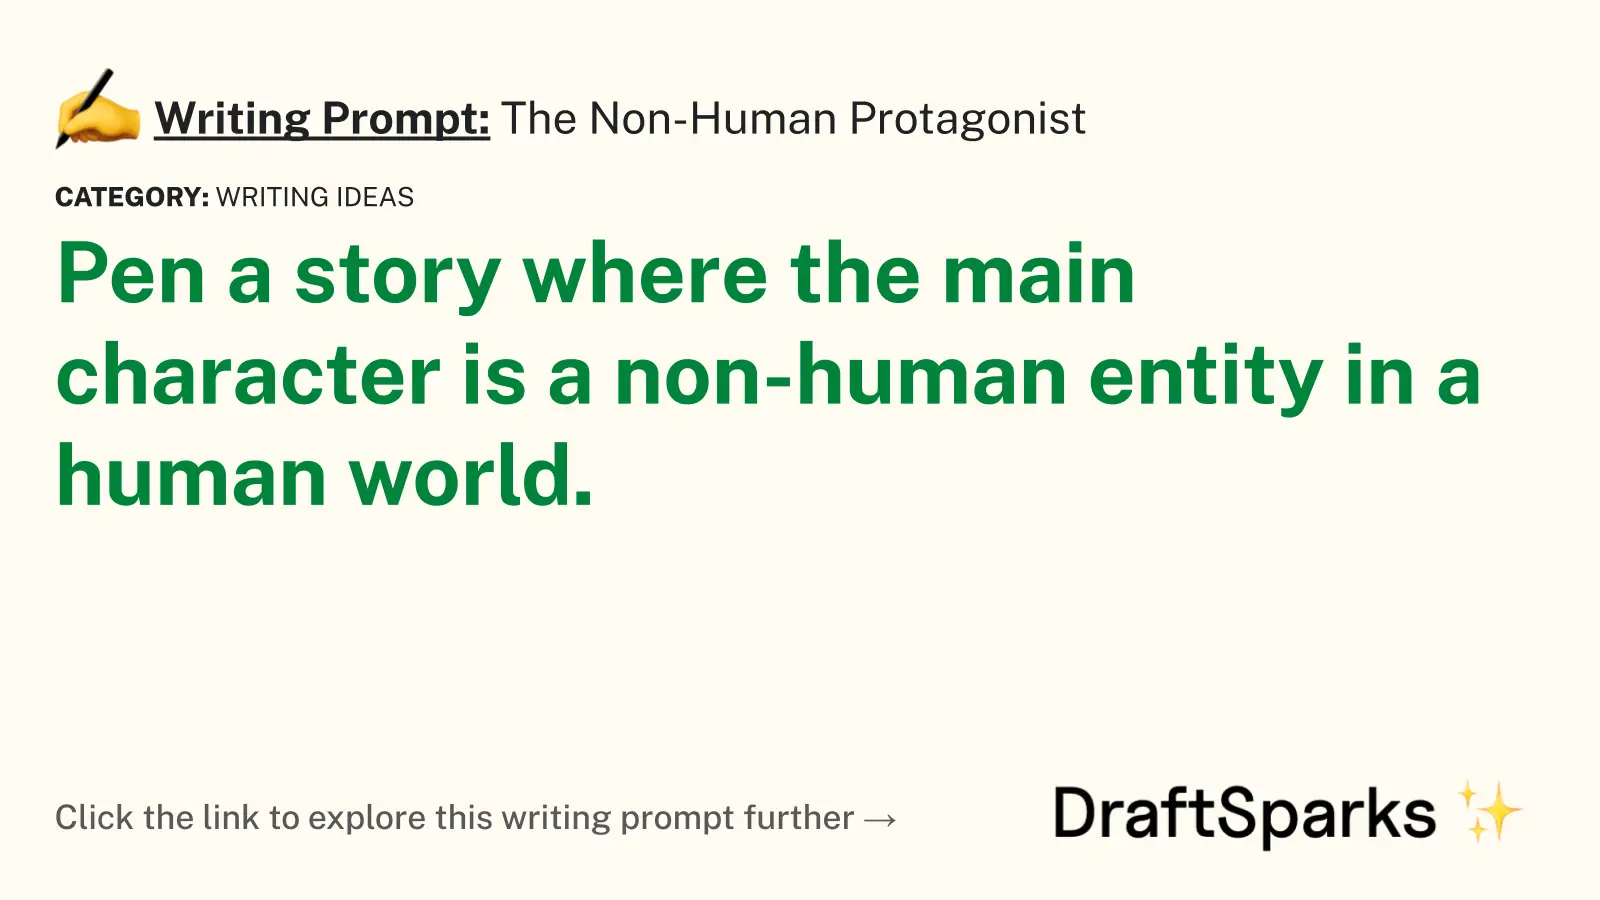 The Non-Human Protagonist